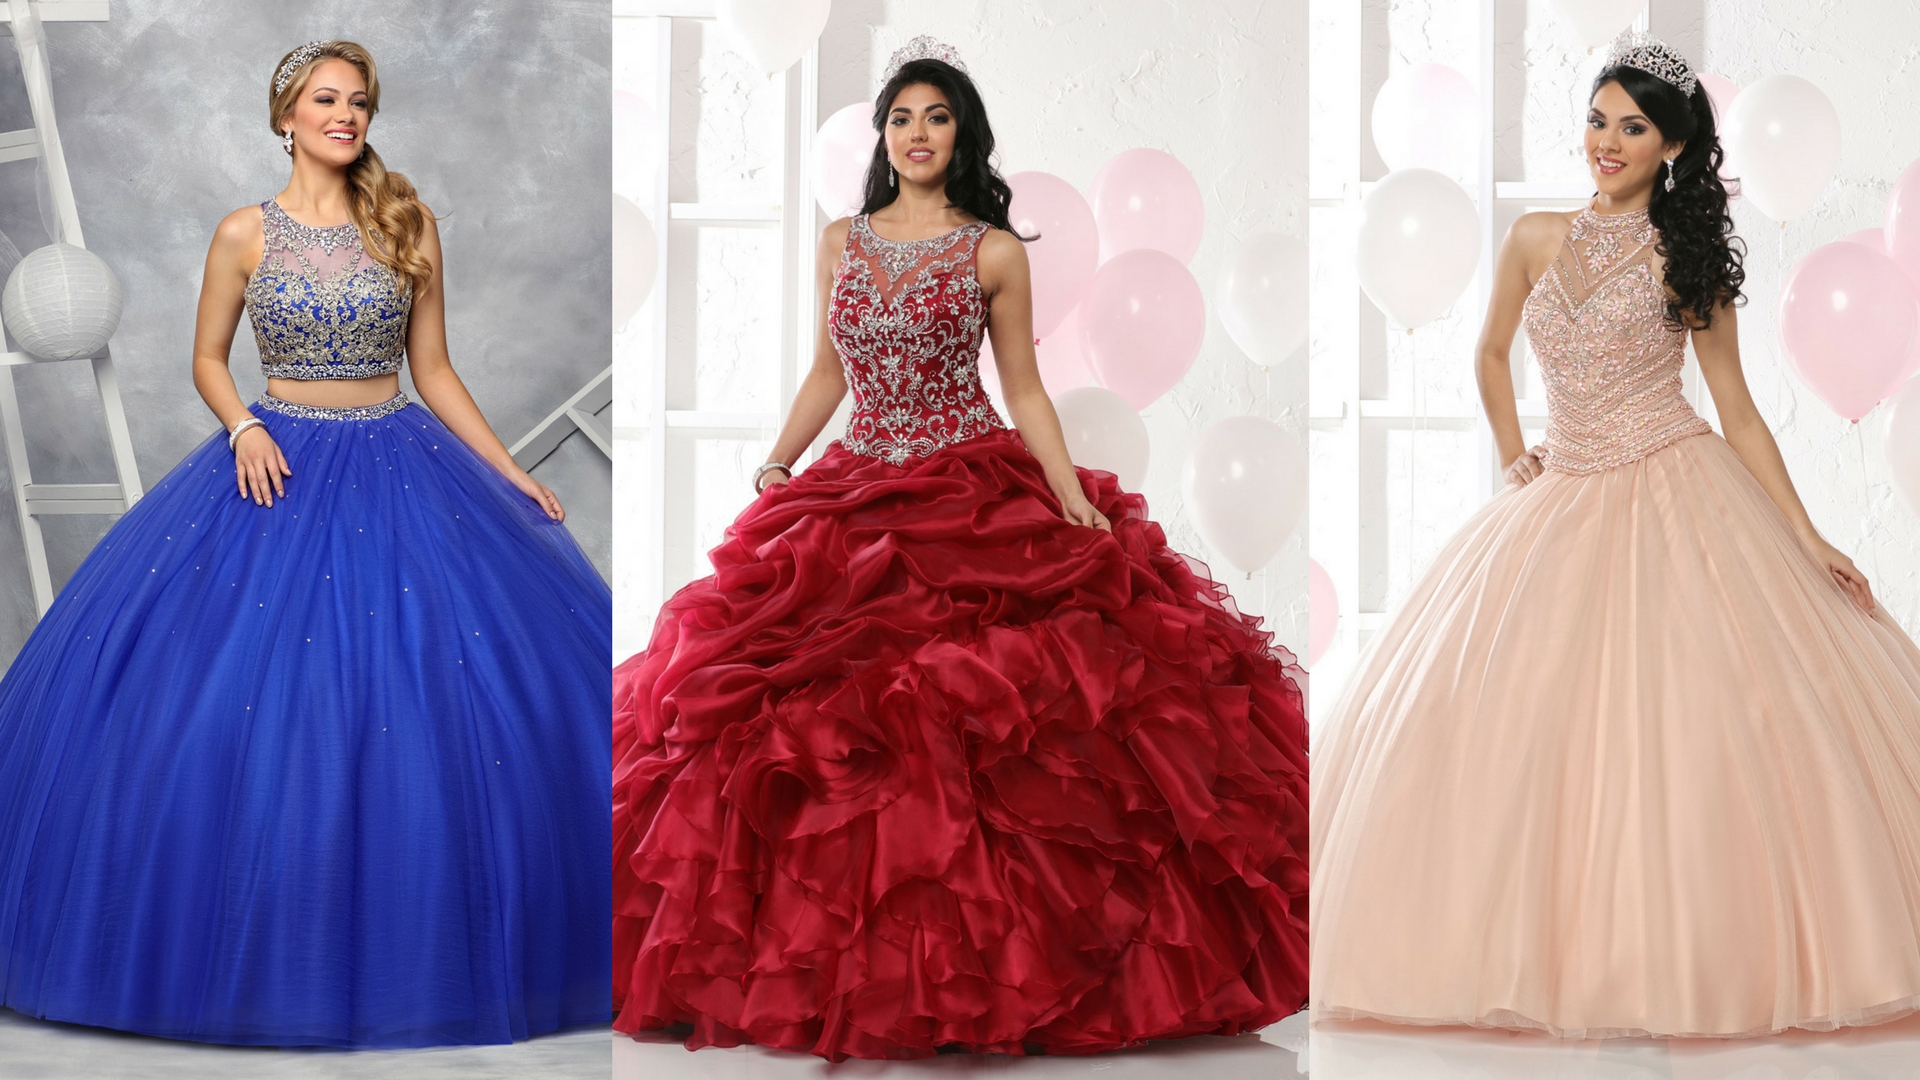 2017 Special Part One: 9 Modest Quinceanera Gowns with Style!